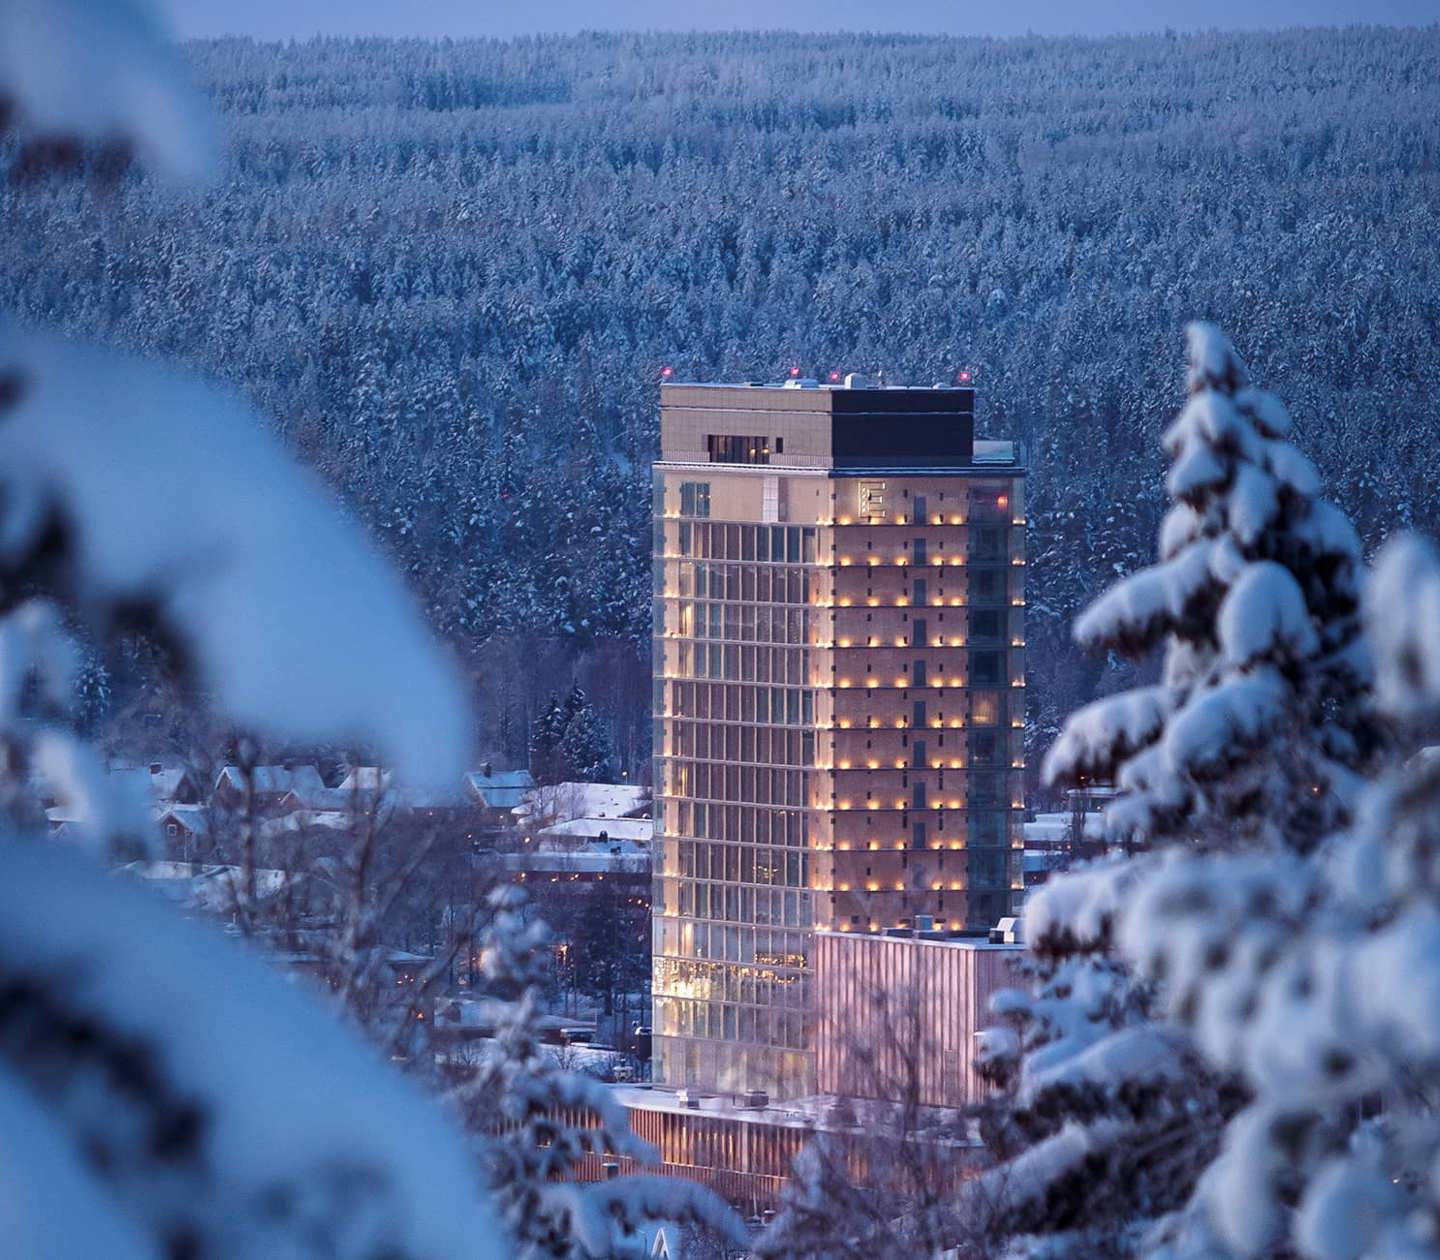 The 20-story Wood Hotel by Elite with snow-covered trees all around